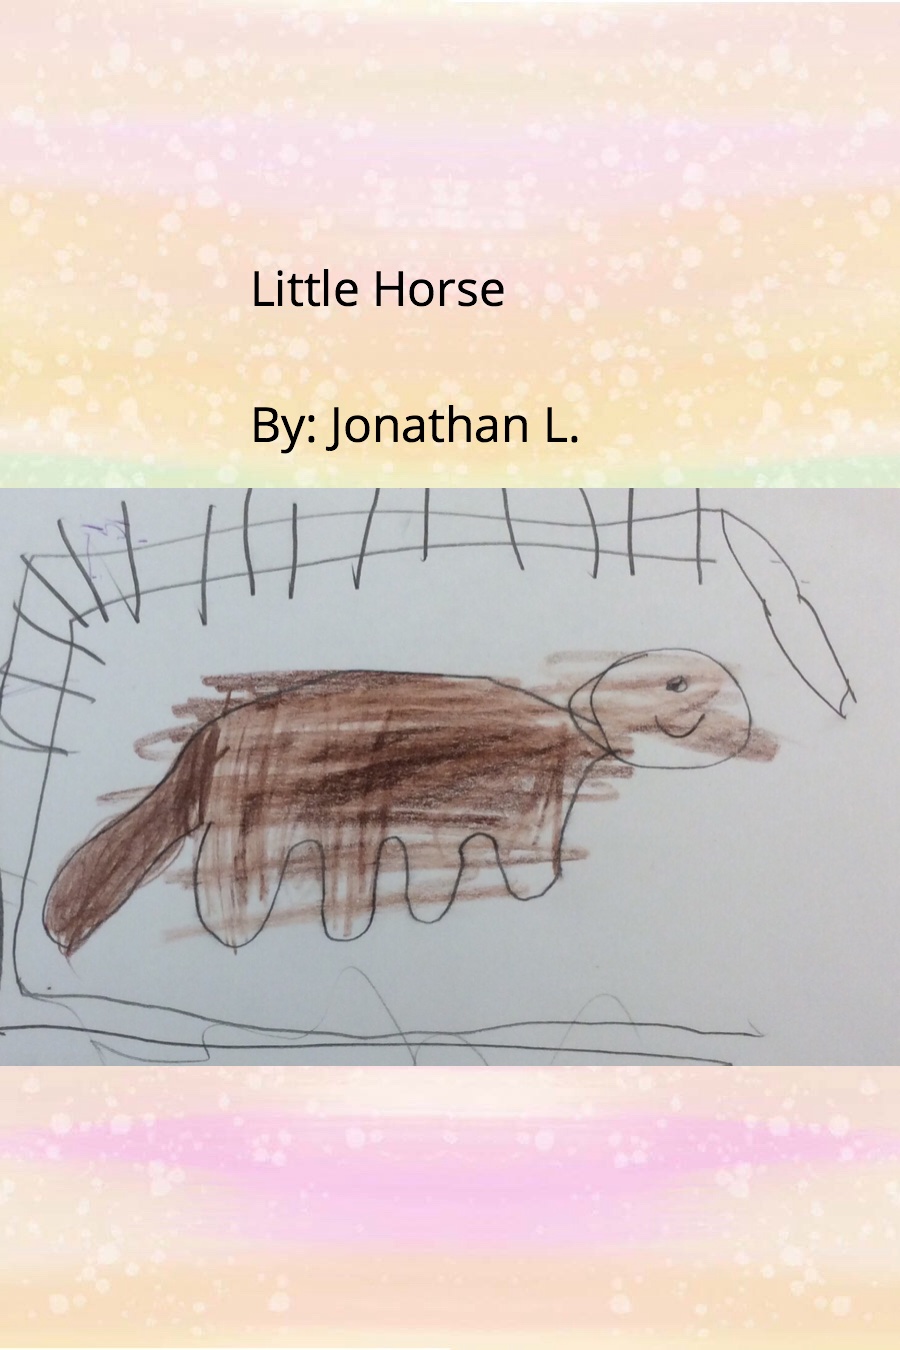 Little Horse by Jonathan L